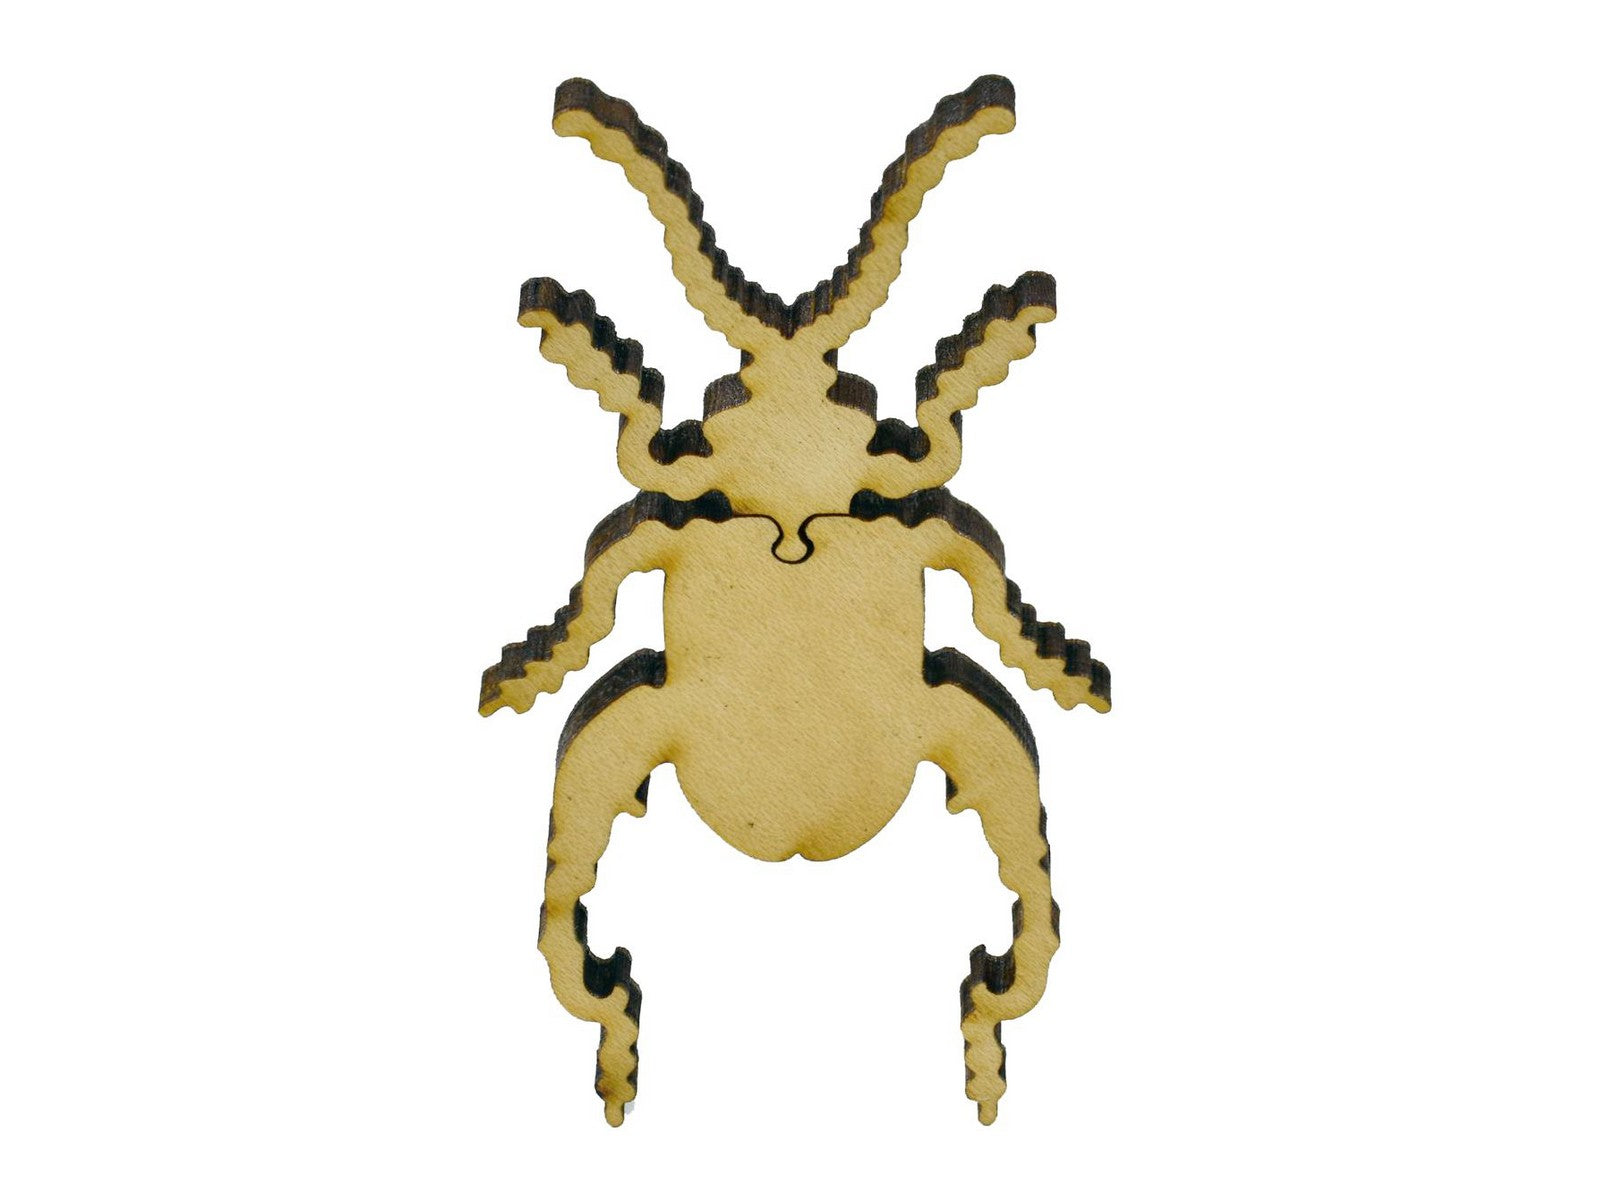 A closeup of pieces in the shape of a beetle.